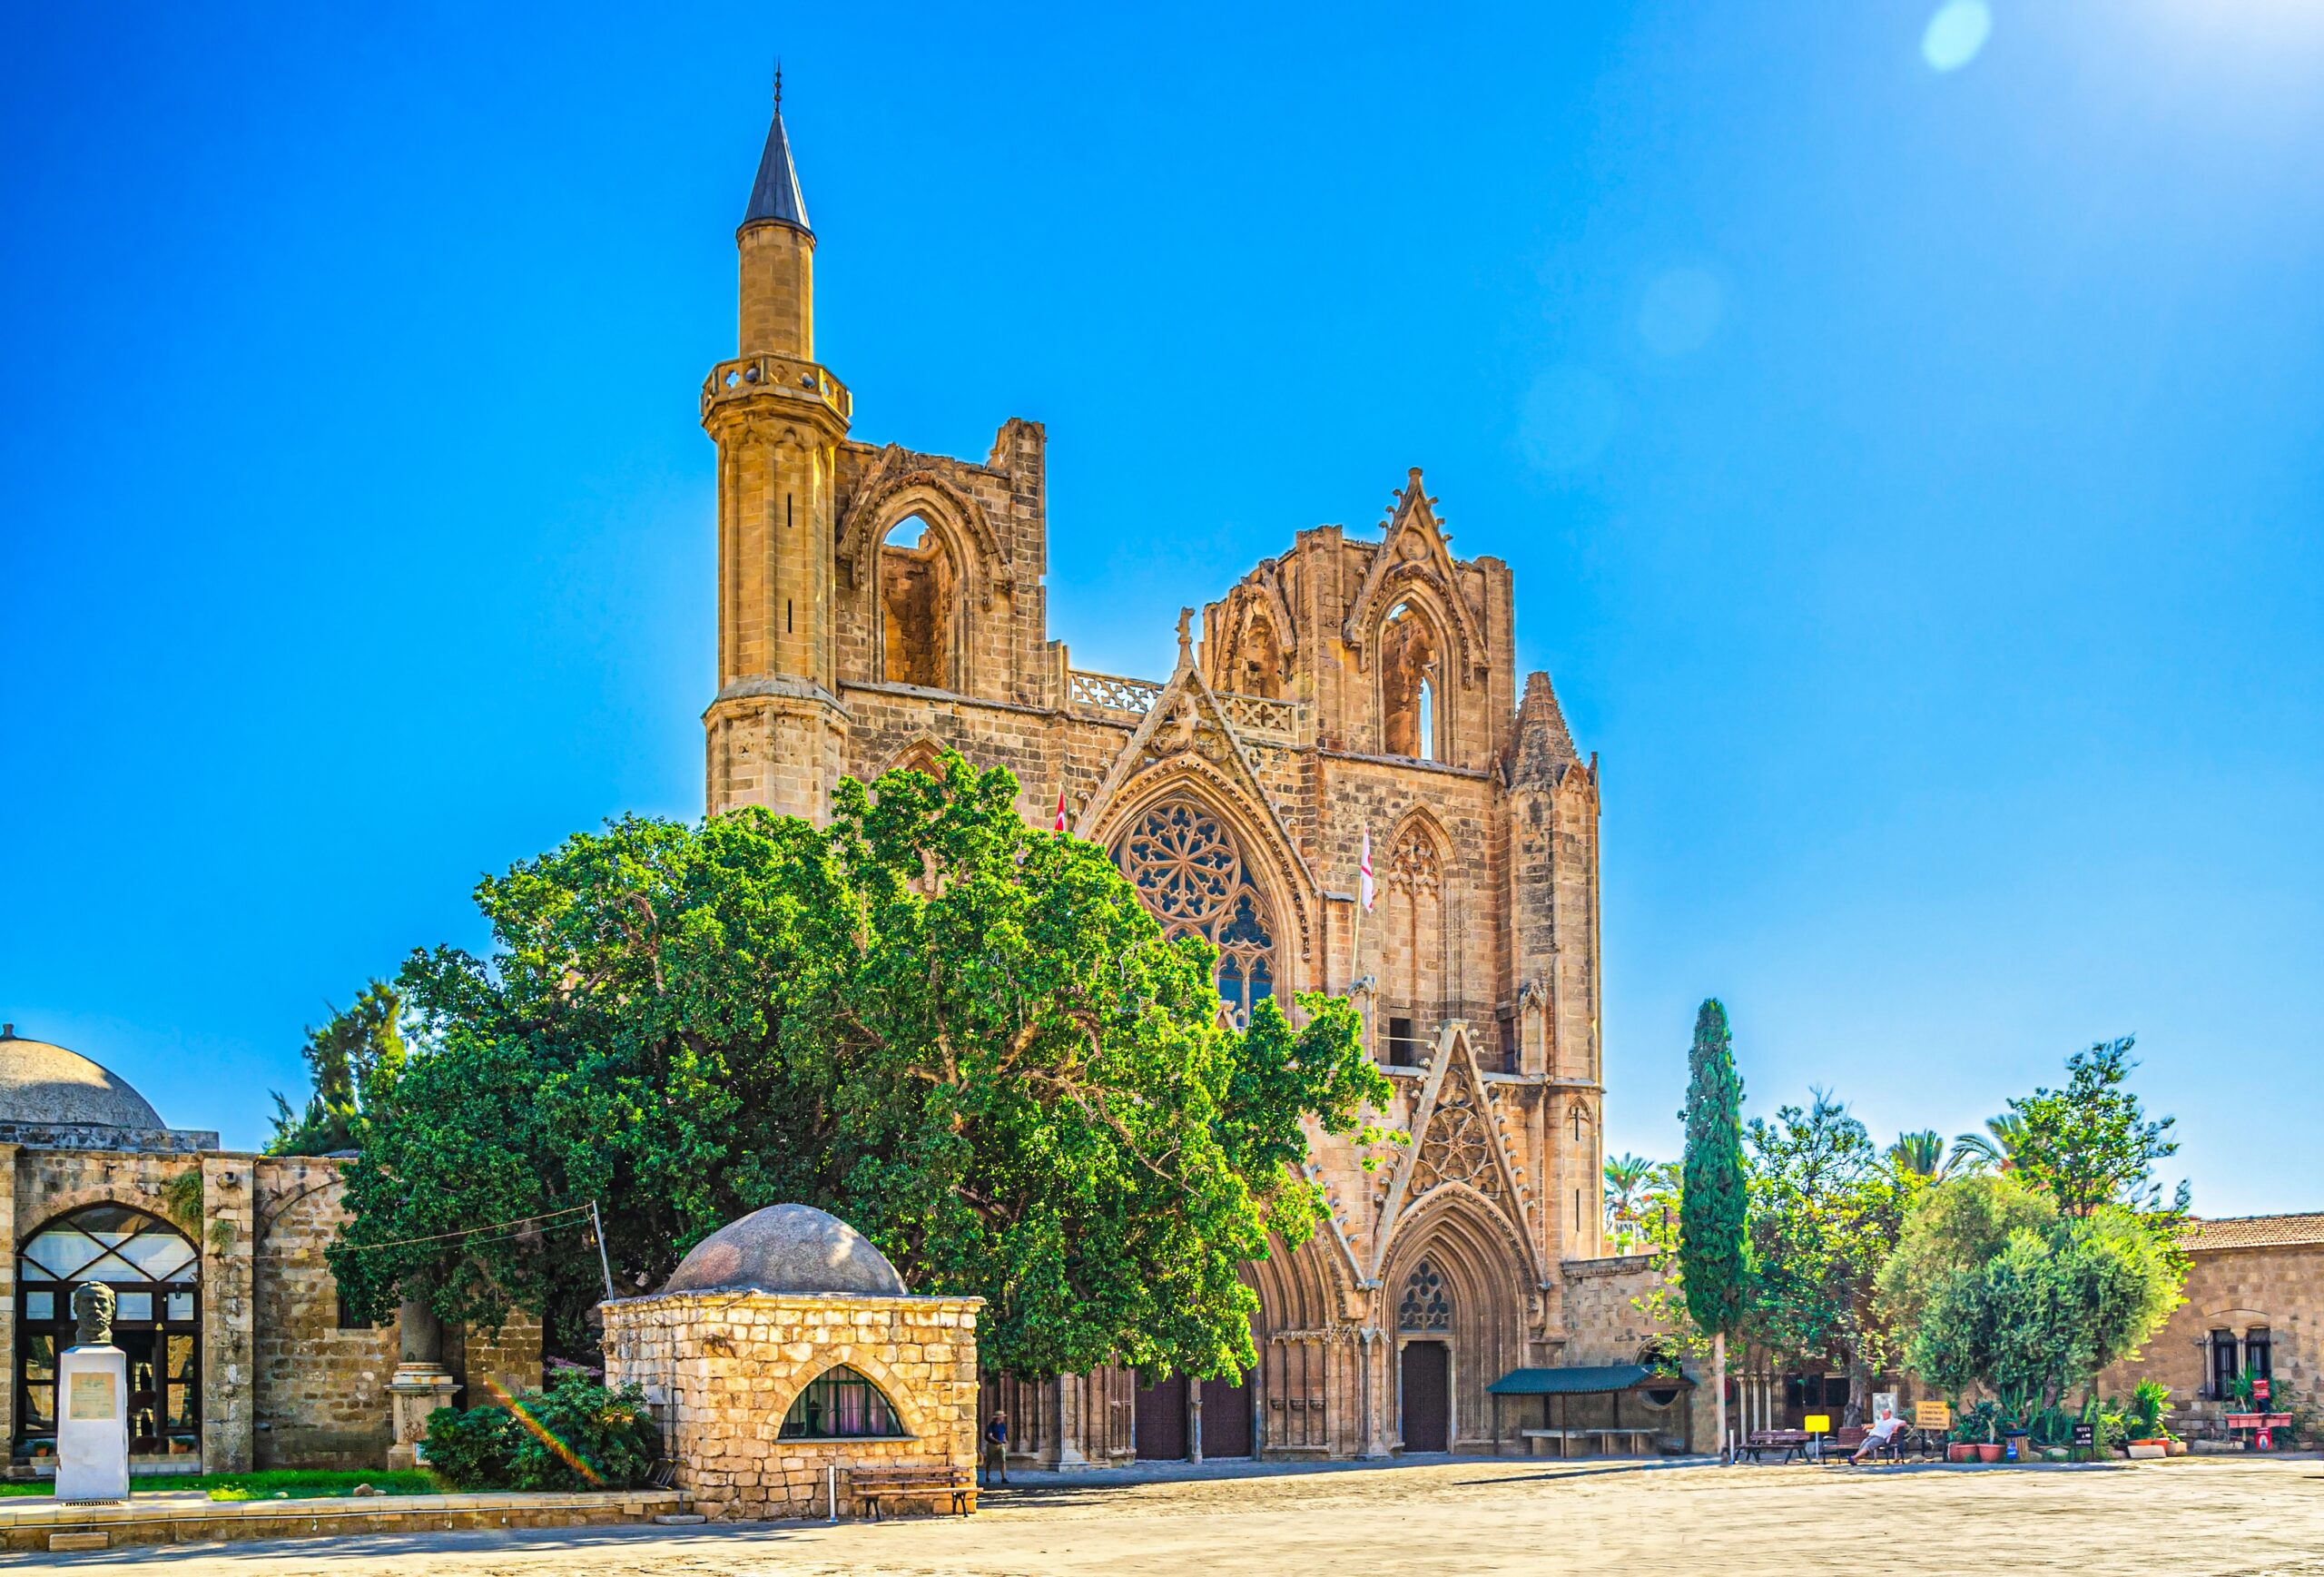 Minaret of Lala Mustafa Pasha Mosque framed by Gothic arches, representing the Ottoman influence in Famagusta, Cyprus.